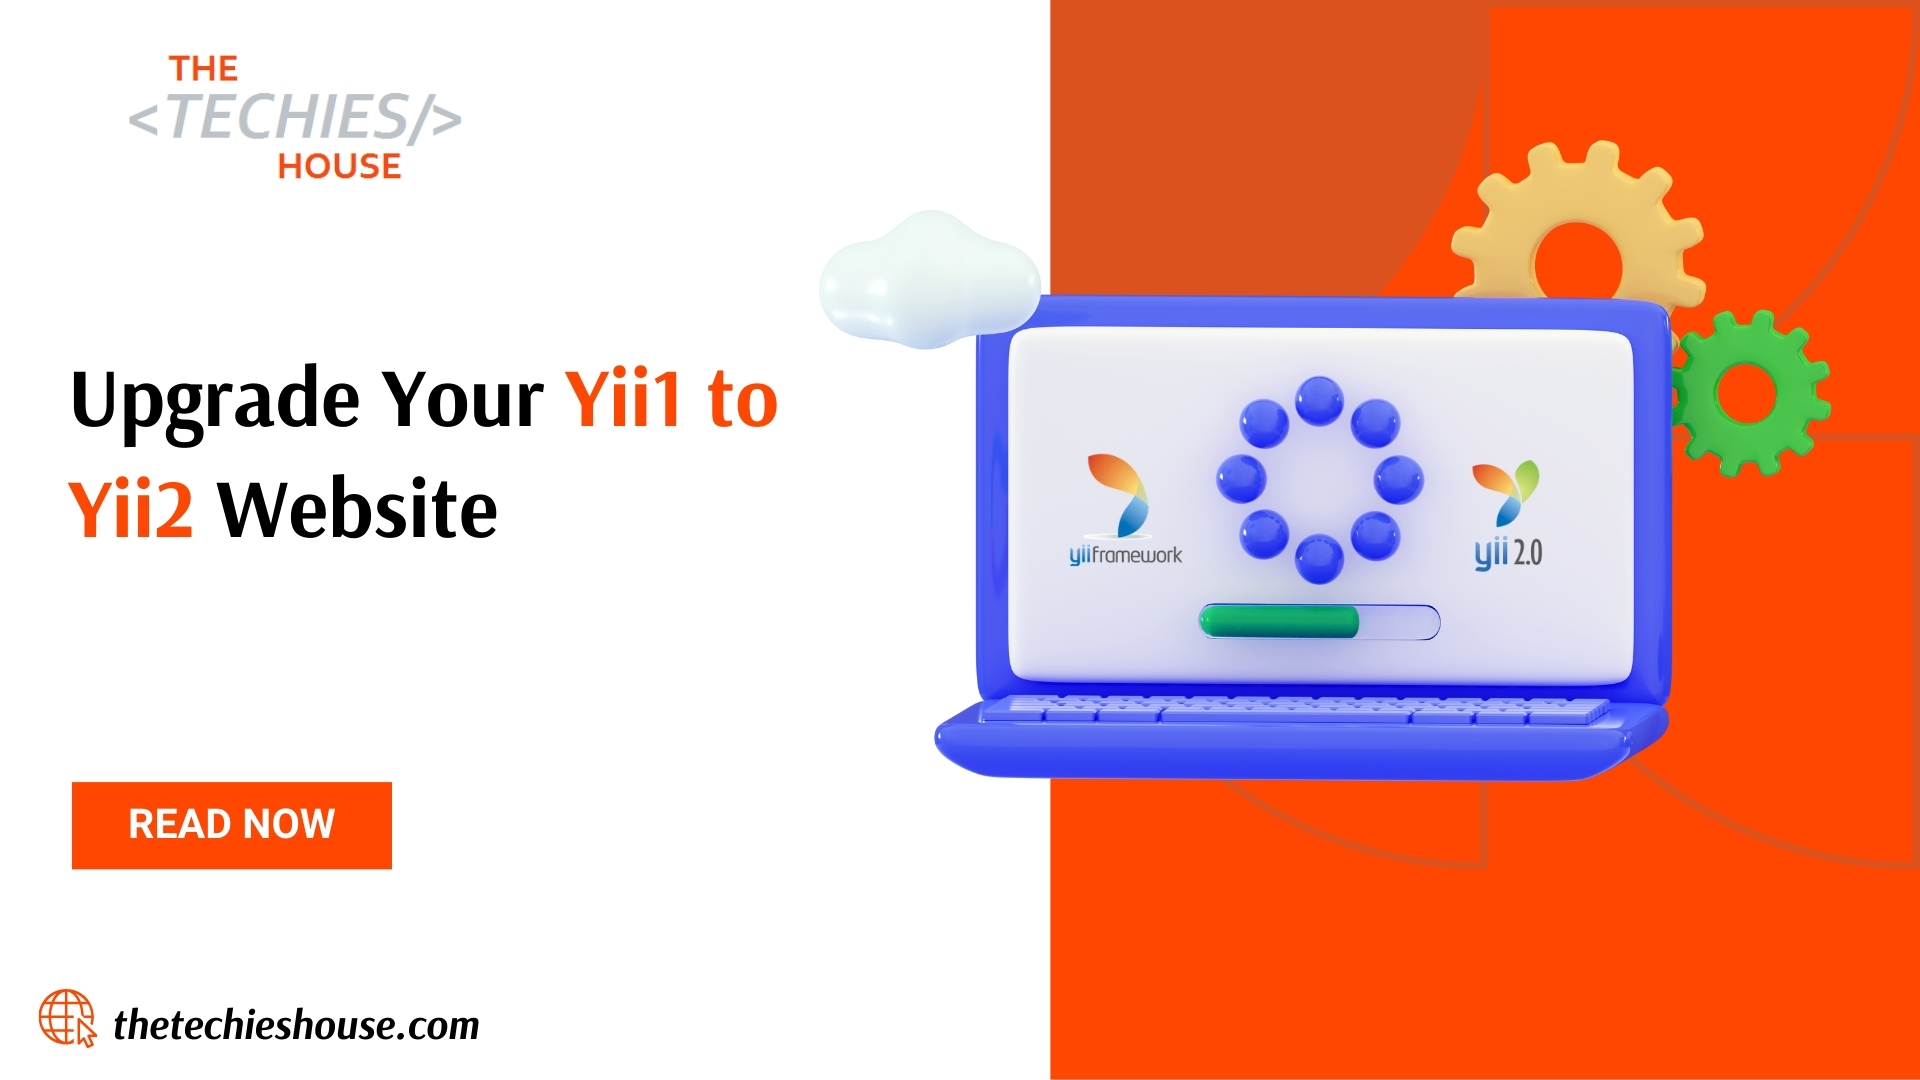 Upgrade Your Yii1 to Yii2 Website